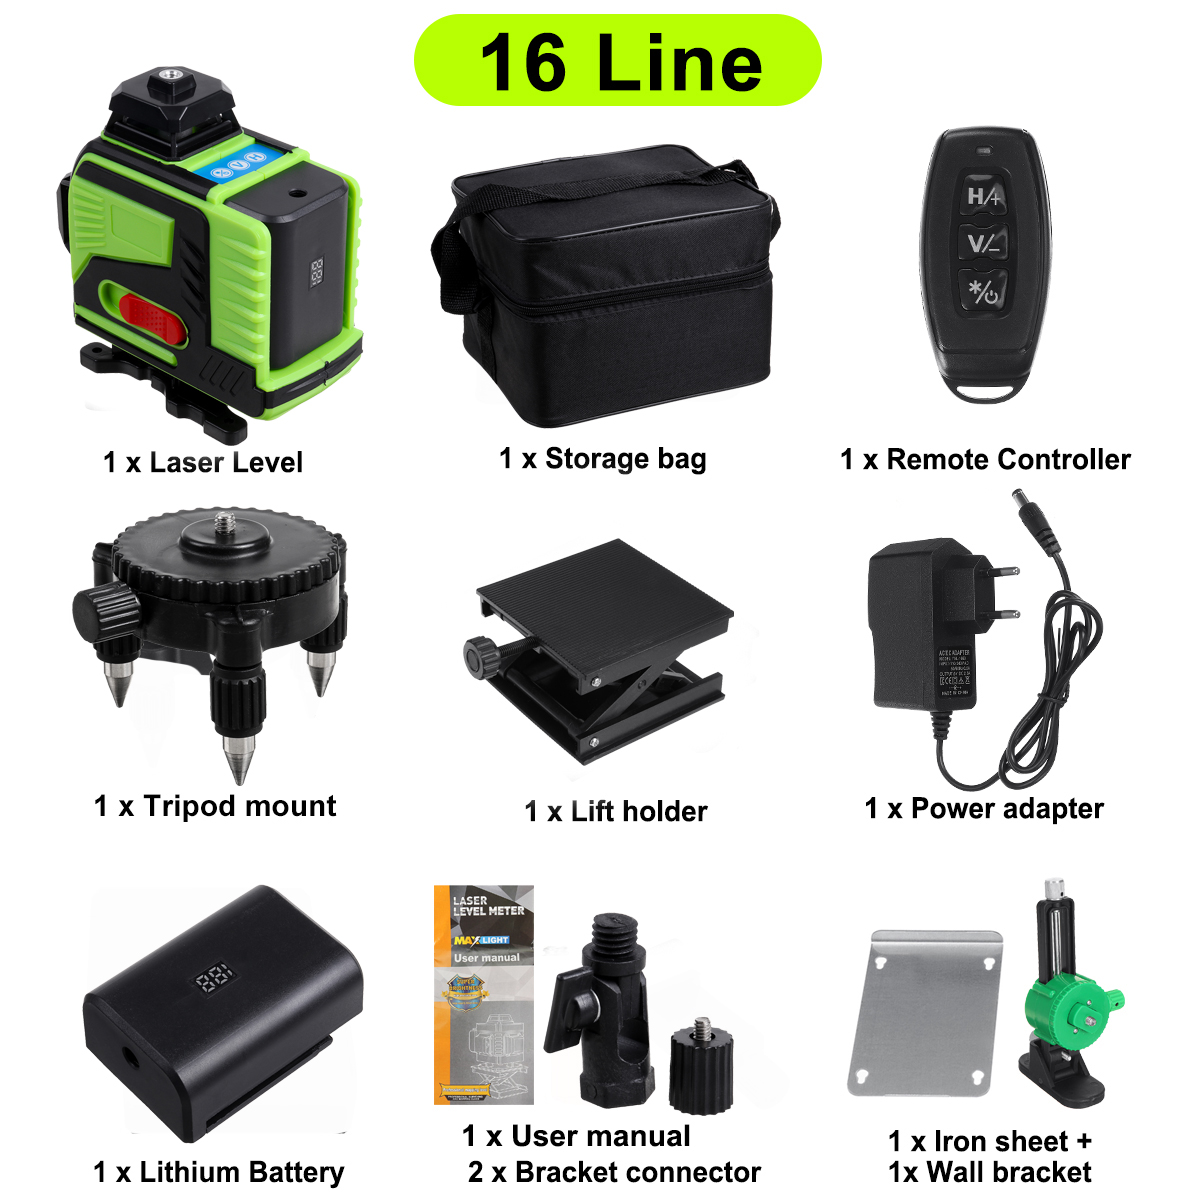 4D-16-Lines-Green-Light-Laser-Levels--360deg-Self-Rotary-Leveling-Measure-Tools-with-2PCS-Lithium-Ba-1941453-16